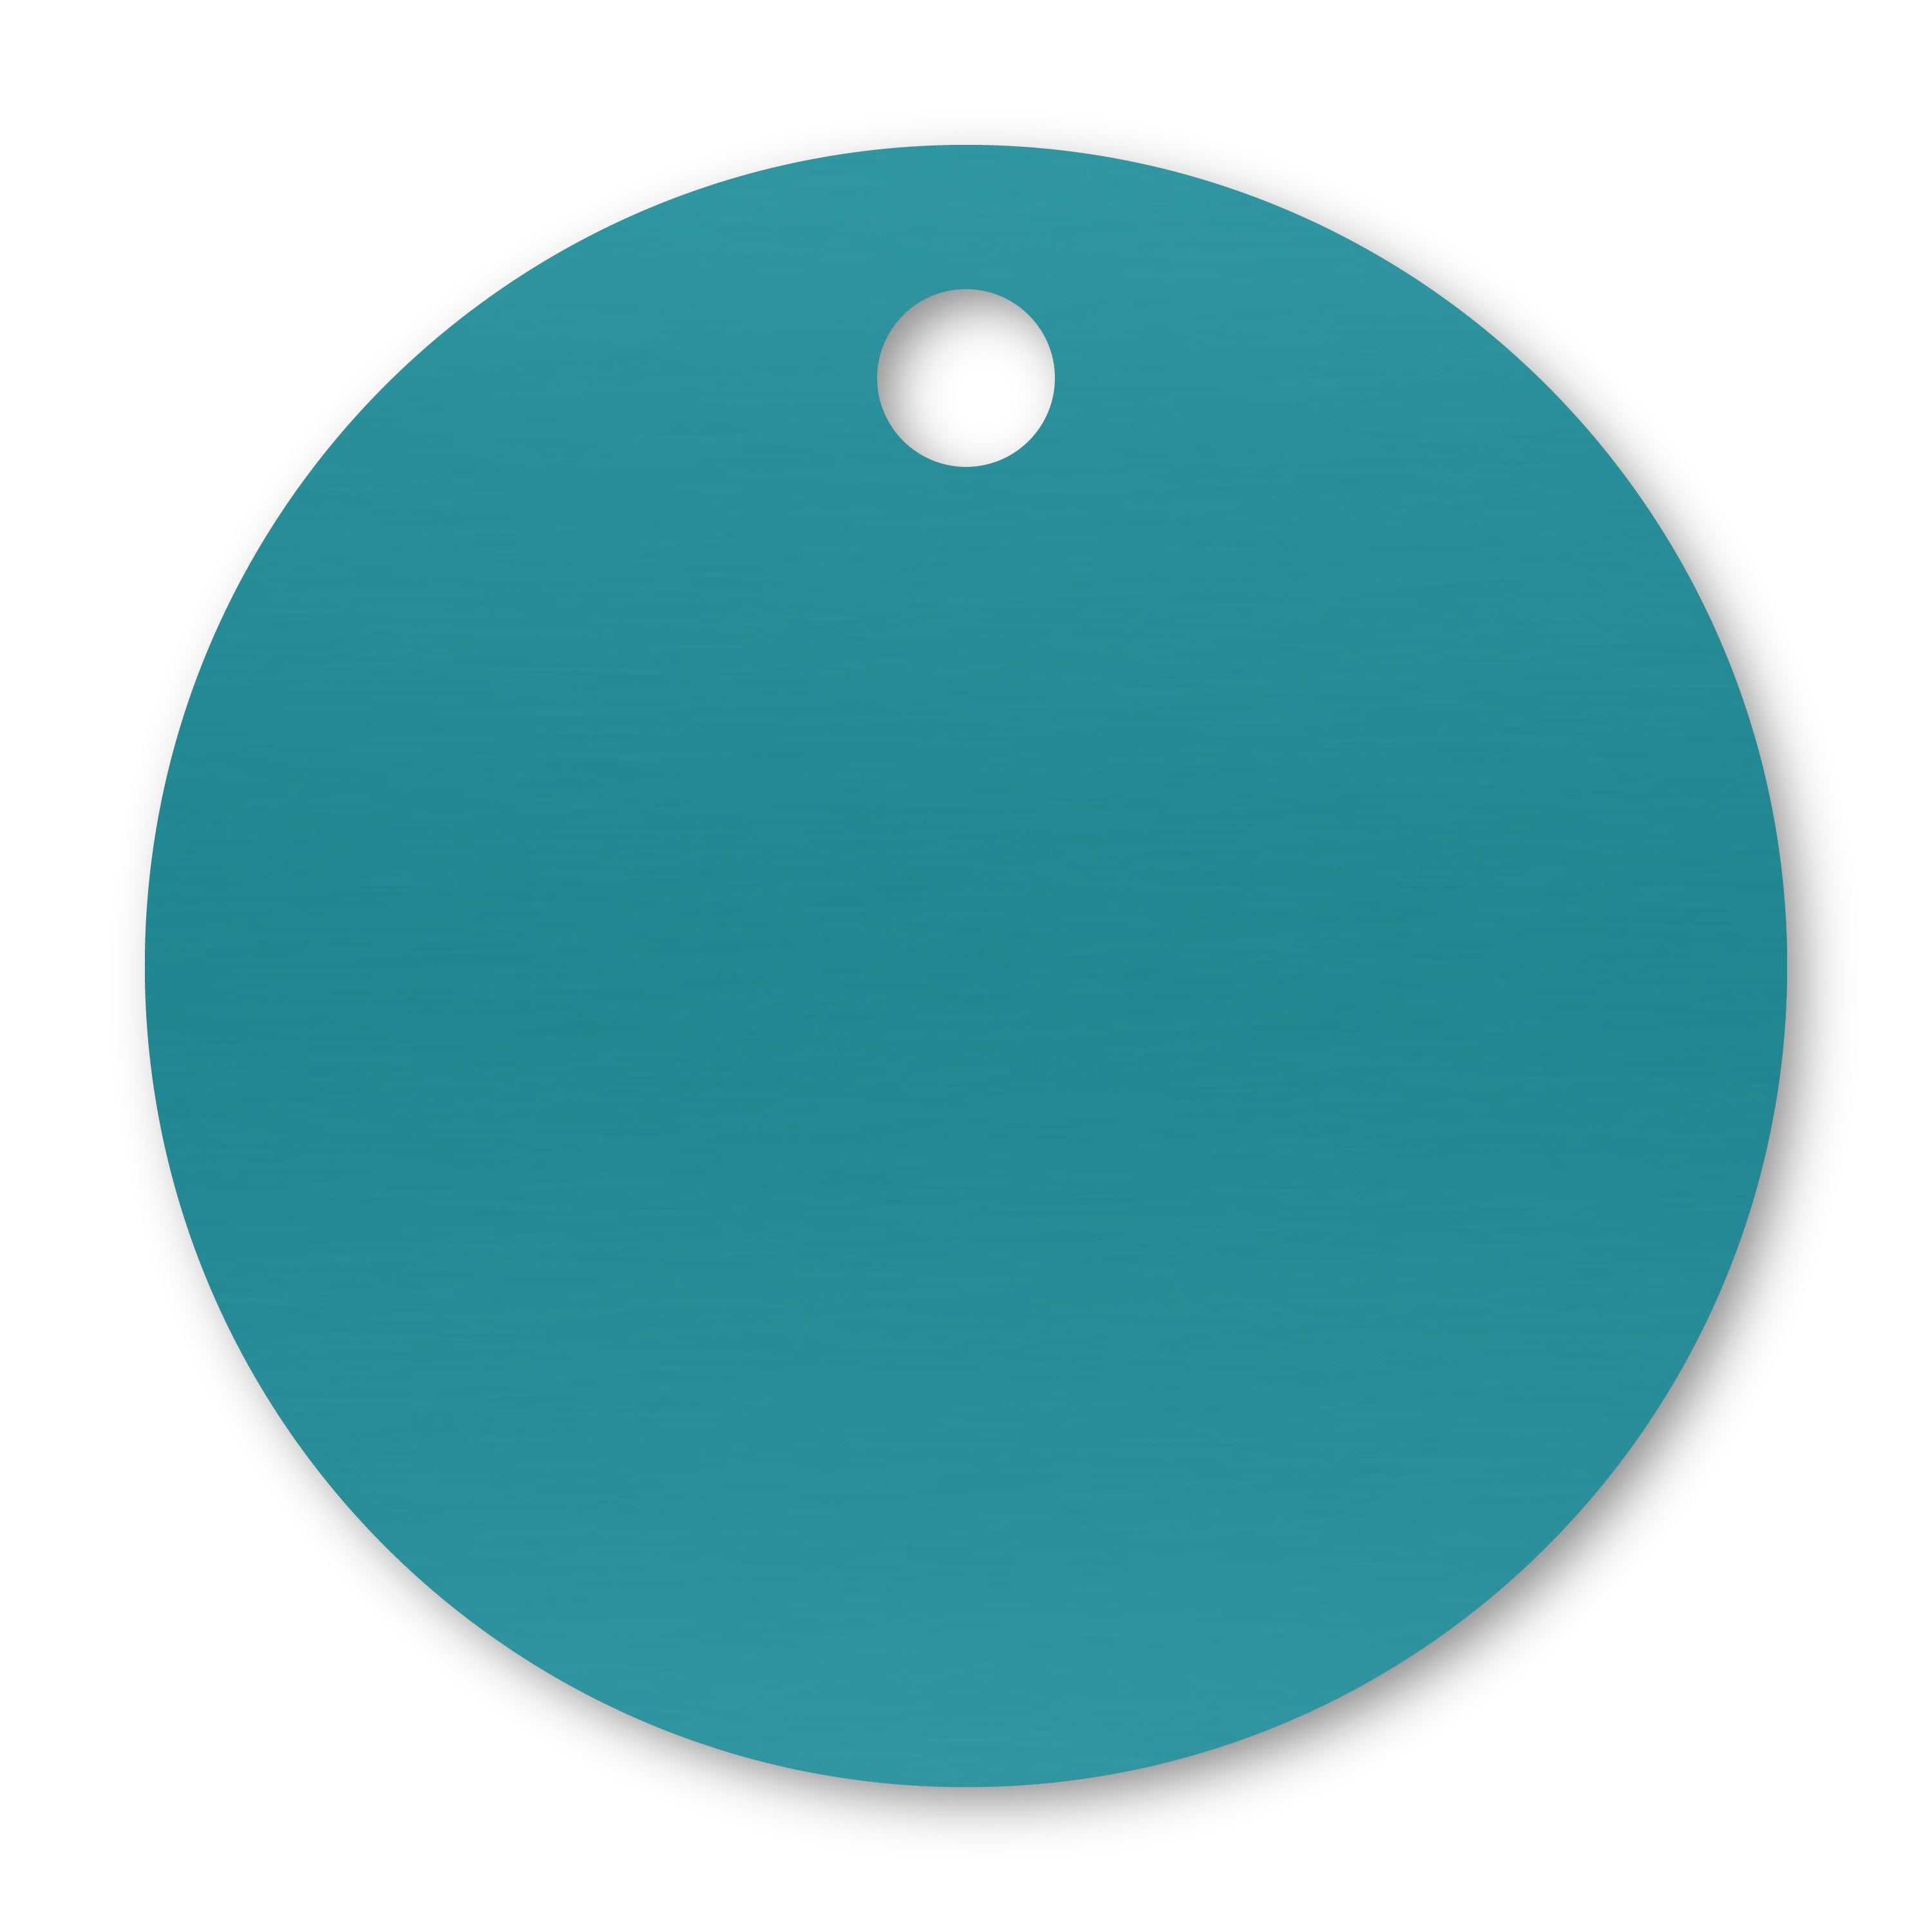 Anodized Aluminum Round Tags, 2" with 3/16" Hole, Laser Engraved Metal Tags Craftworks NW Turquoise 